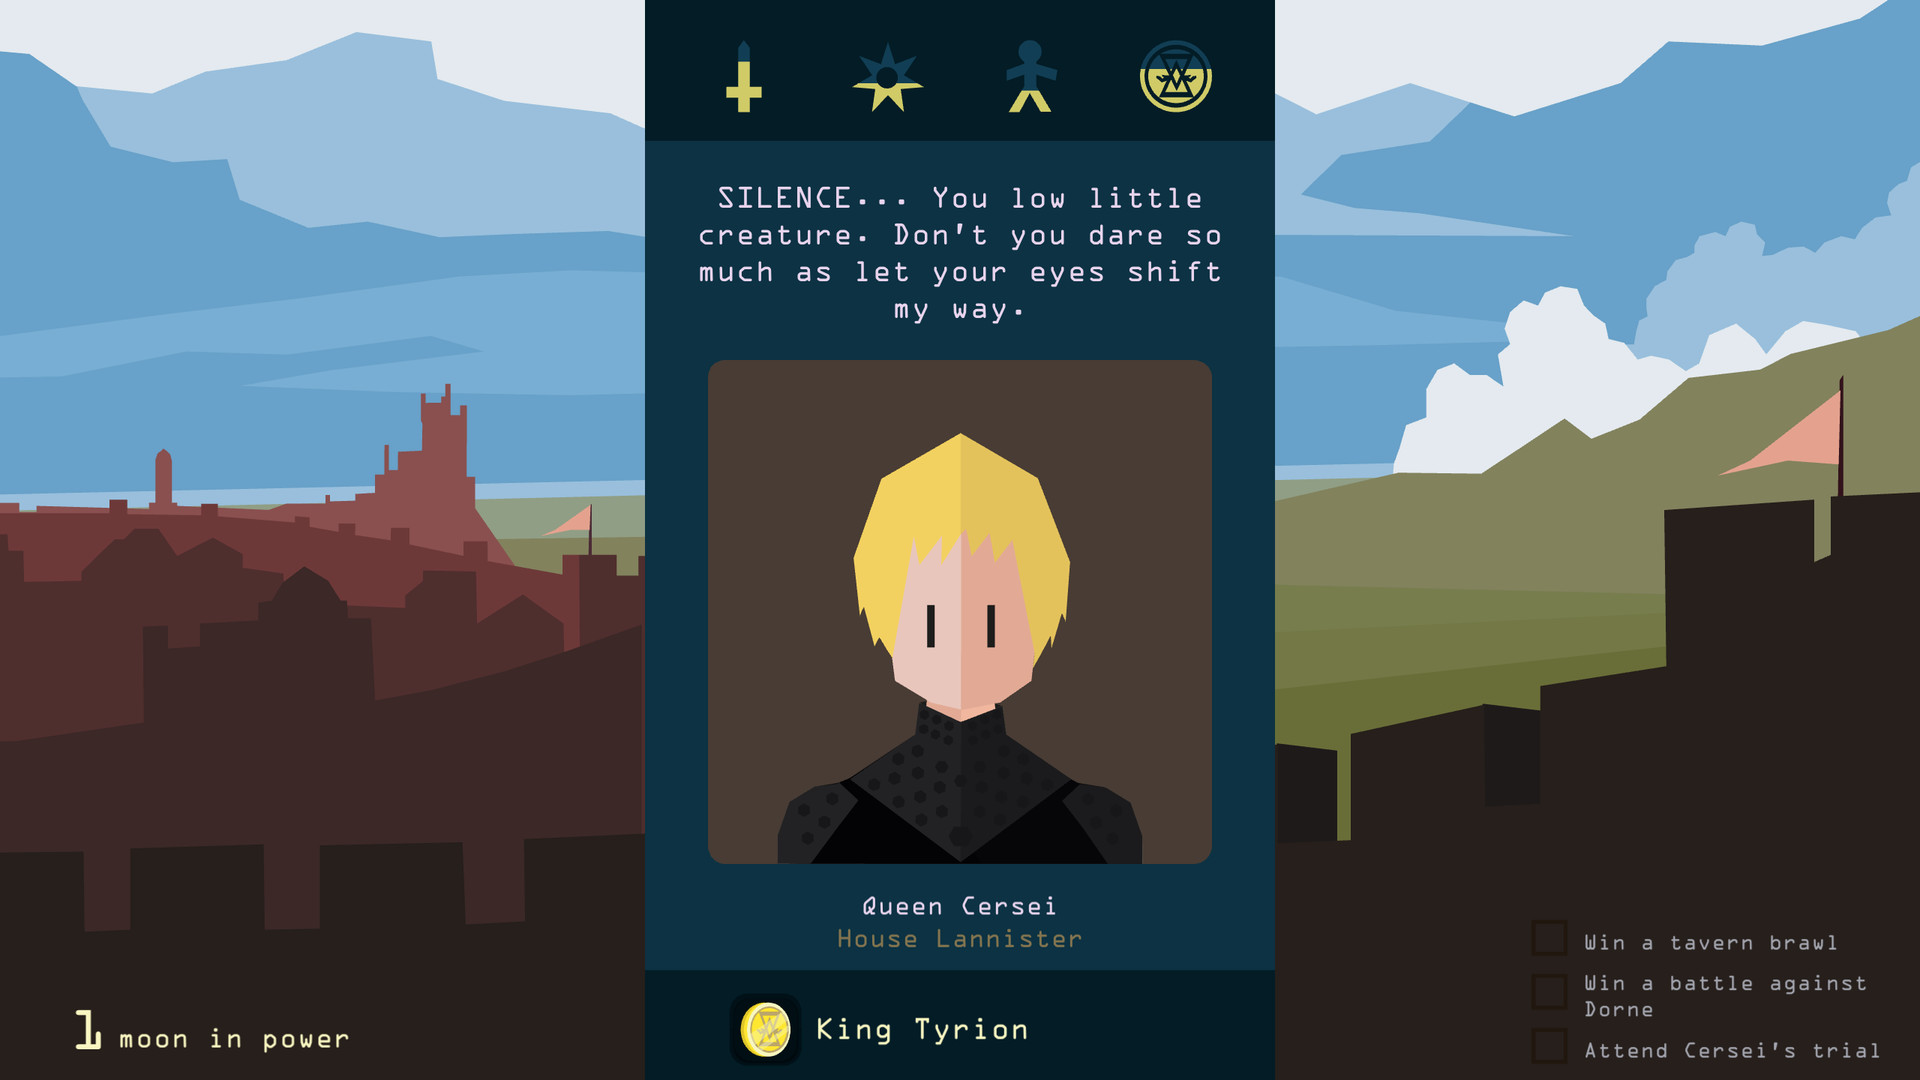 Reigns: Game of Thrones Free Download